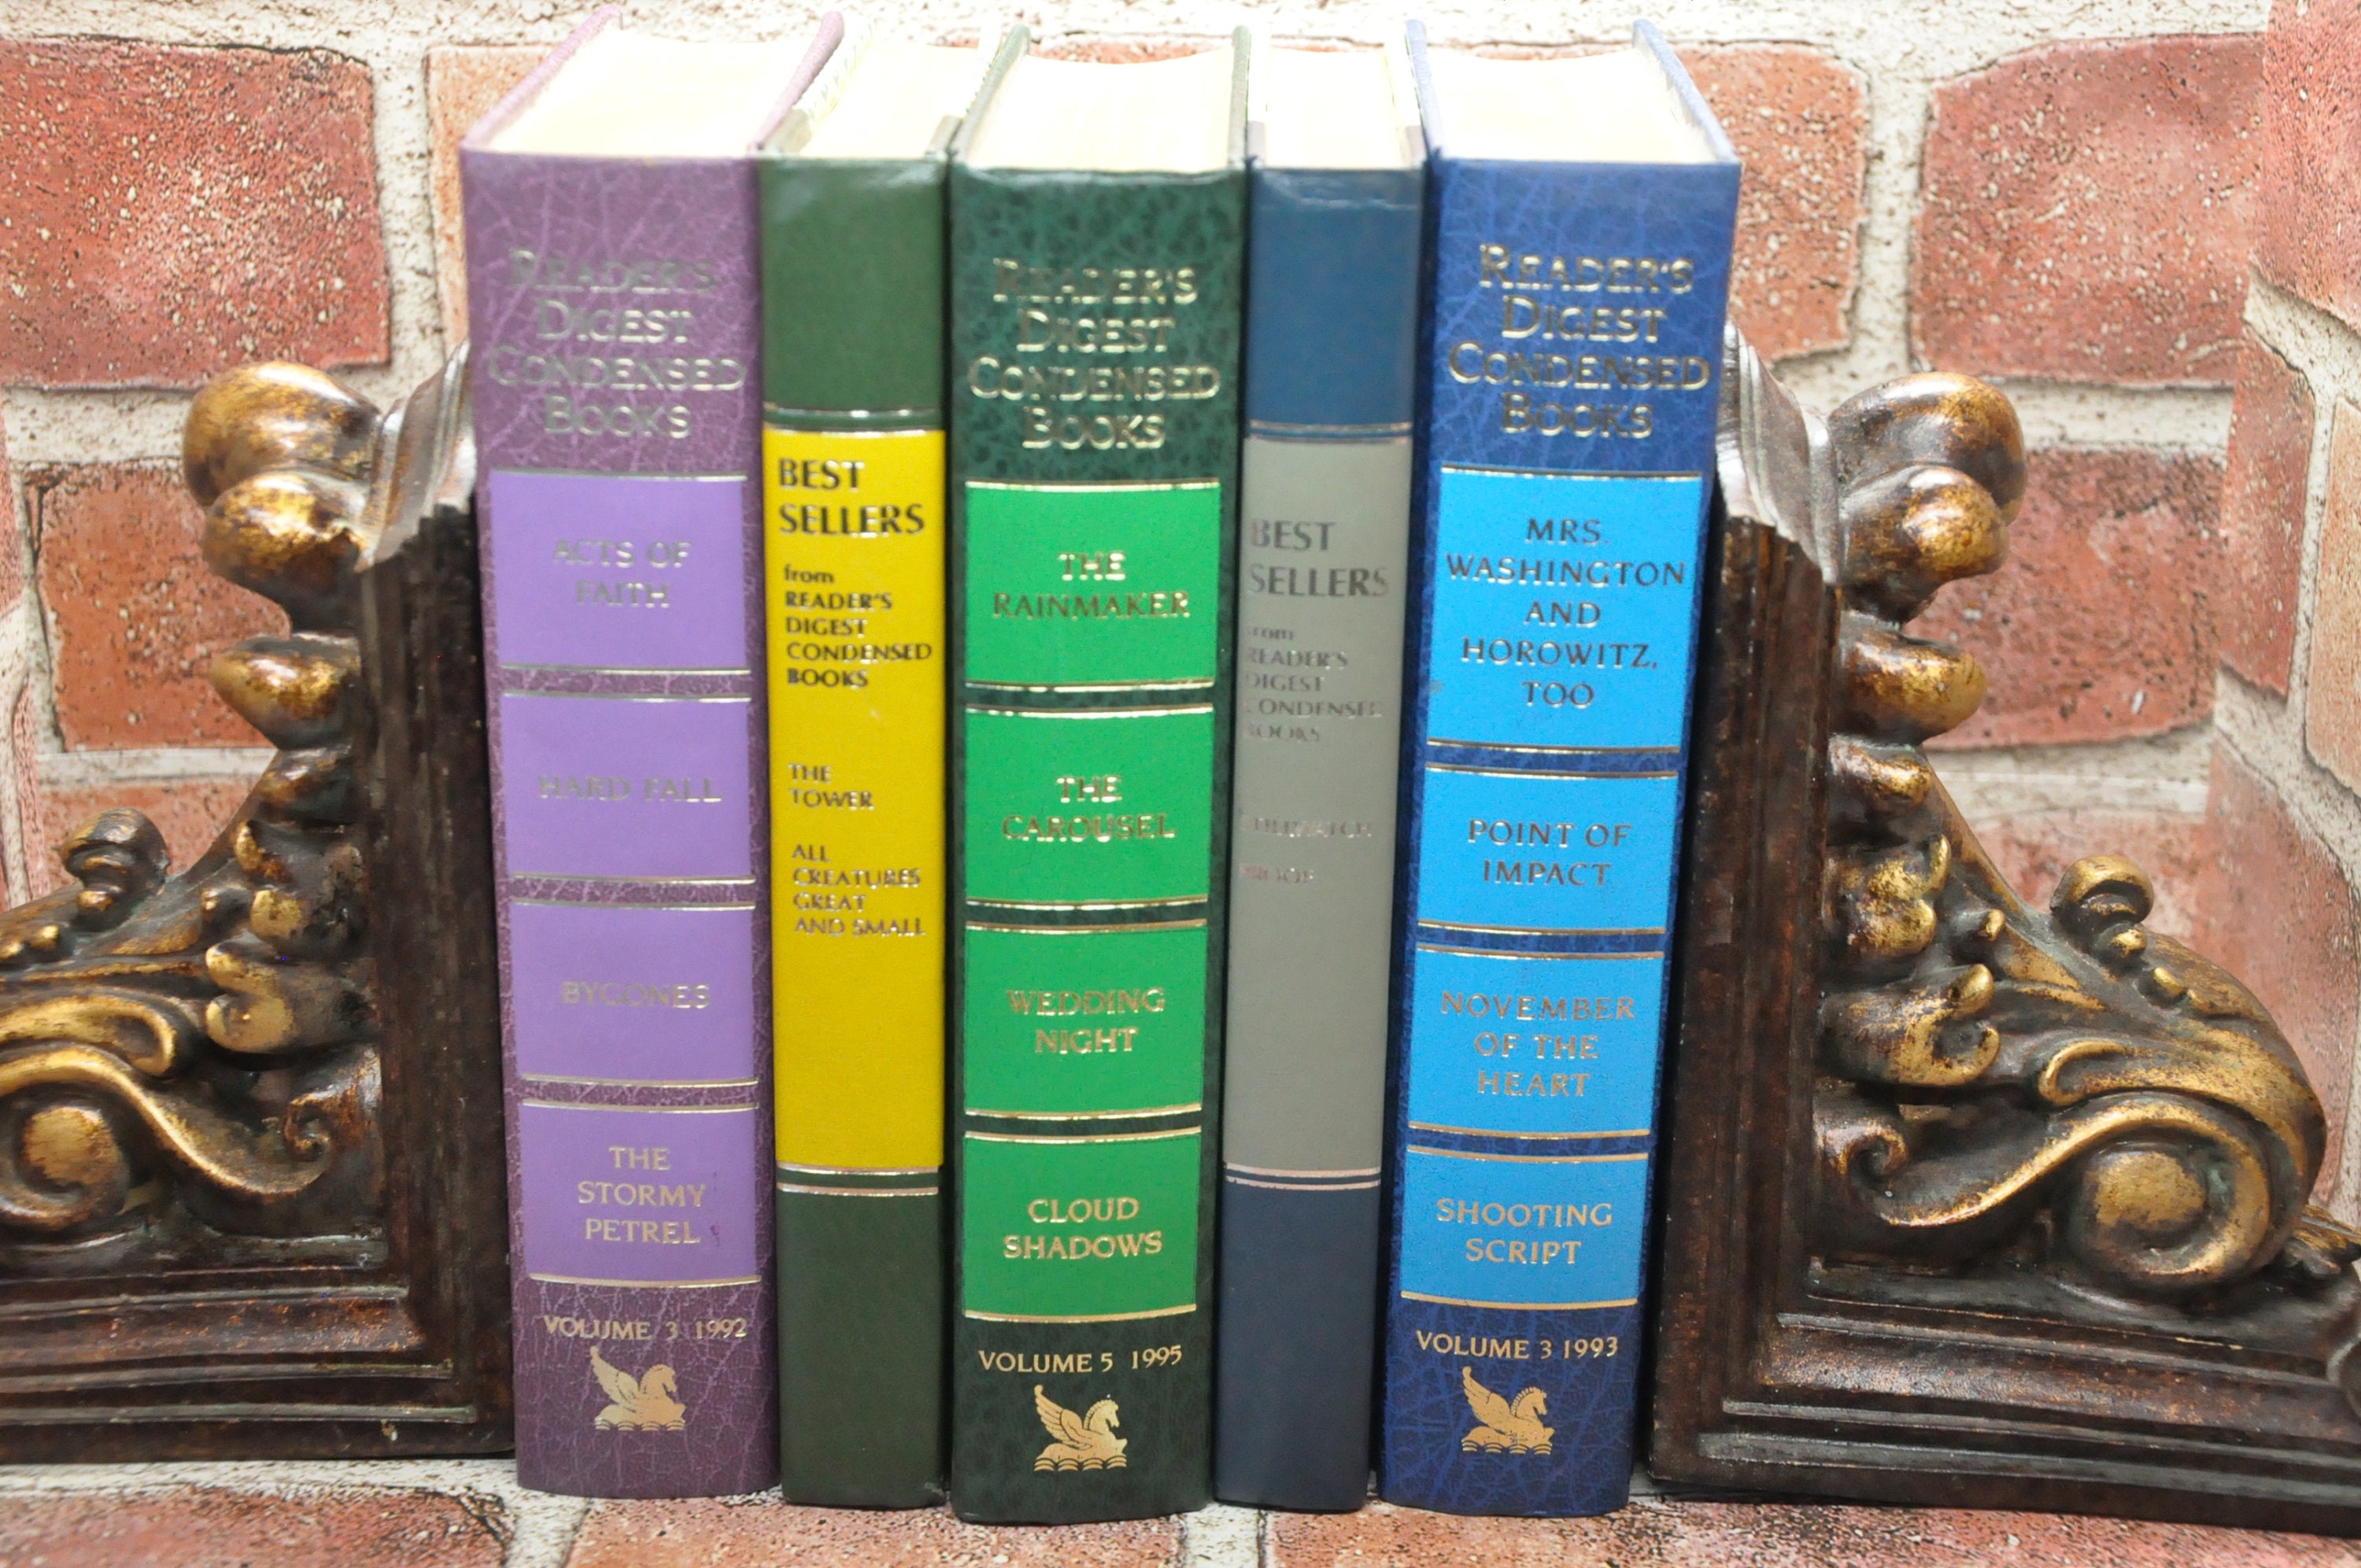 Reader's Digest Condensed Books Set of 5 Vintage Fiction Instant Library  Book Collection Home Decor Decorative Books 